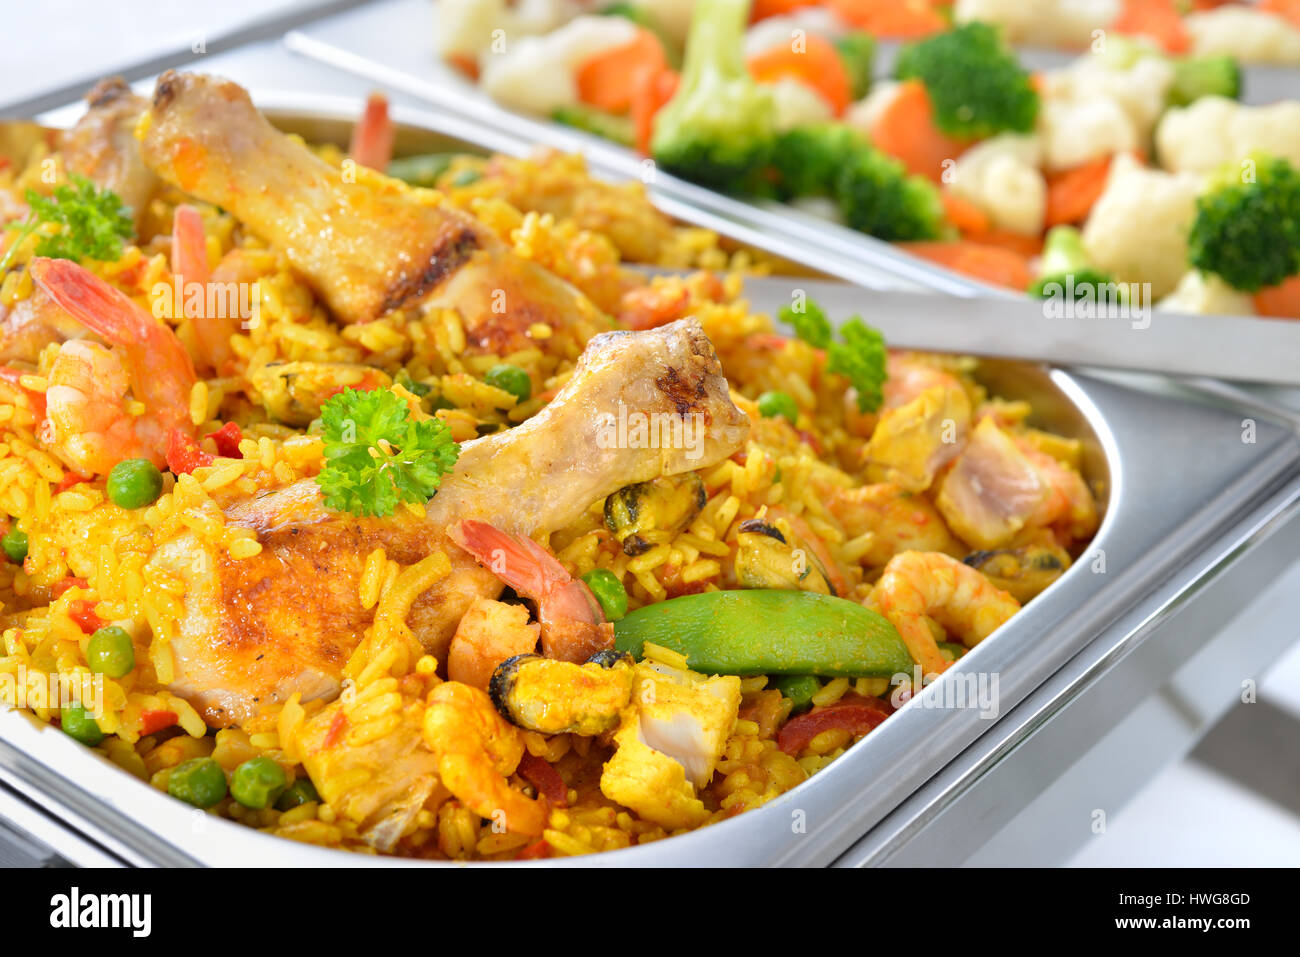 Warm buffet with Spanish paella and mixed buttered vegetables served in a chafing dish Stock Photo